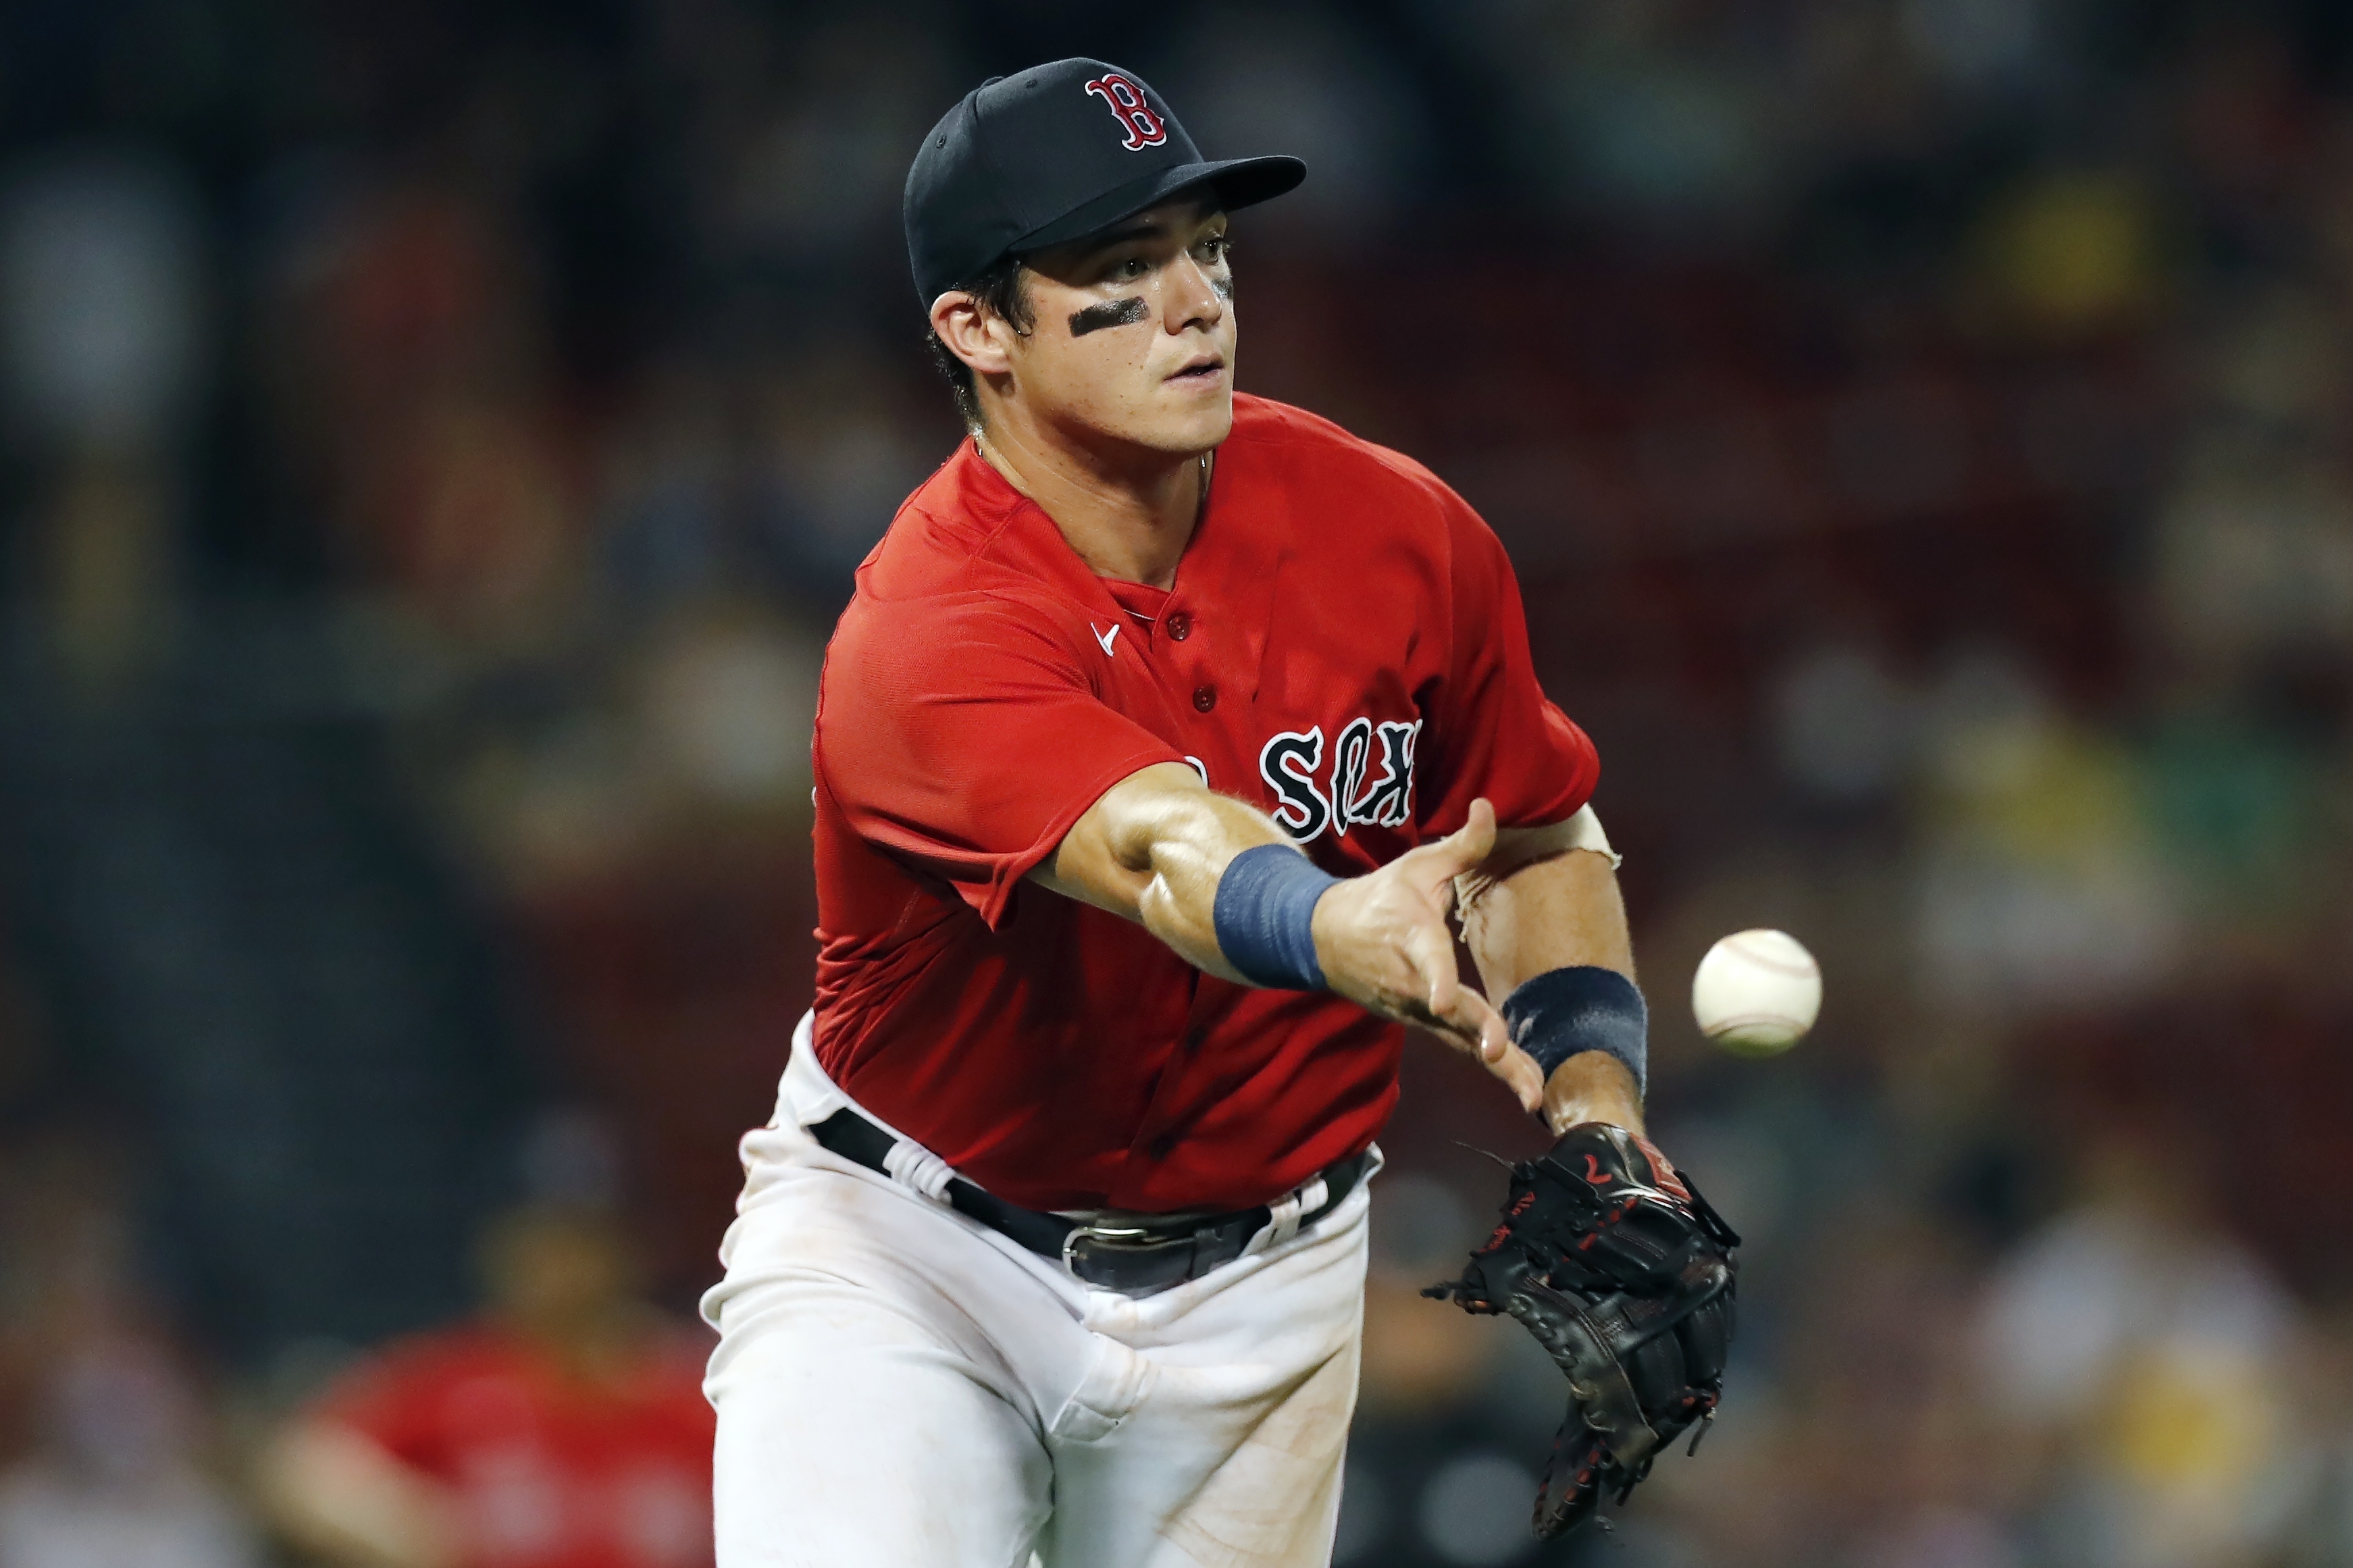 Bobby Dalbec returns to the Red Sox, with expectations tempered